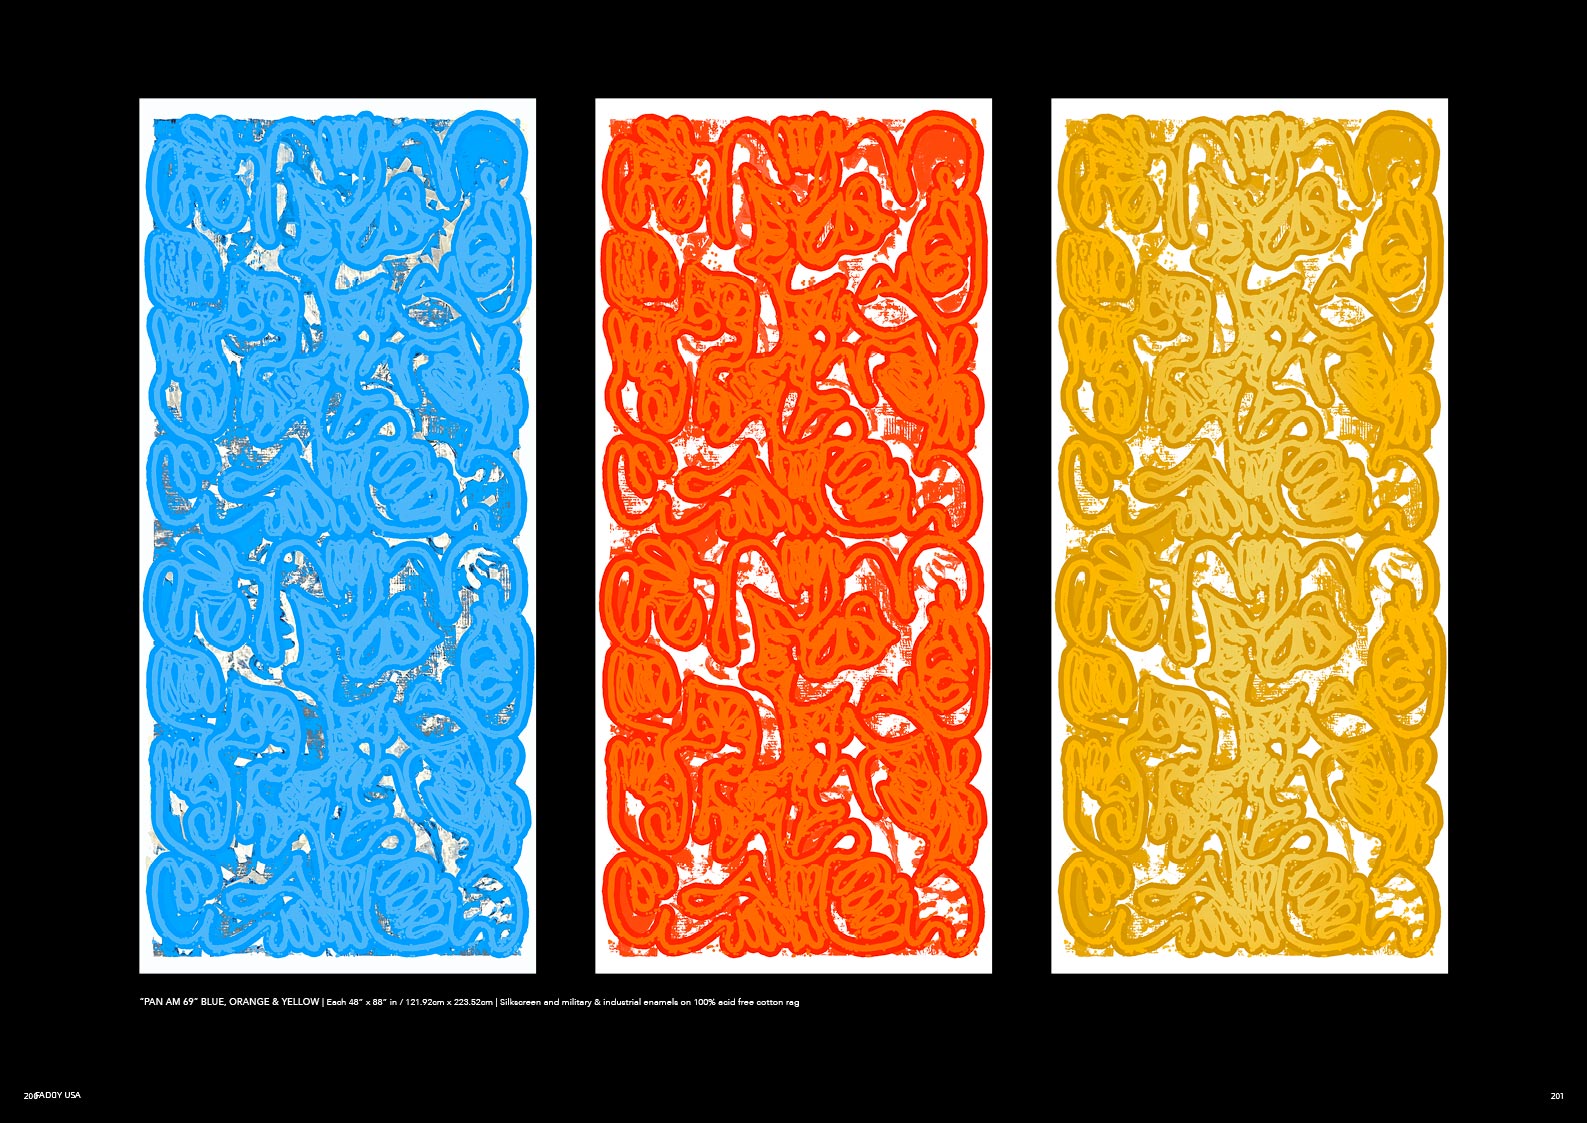 “PAN AM 69” BLUE, ORANGE & YELLOW | Each 48” x 88” in / 121.92cm x 223.52cm | Silkscreen and military & industrial enamels on 100% acid free cotton rag